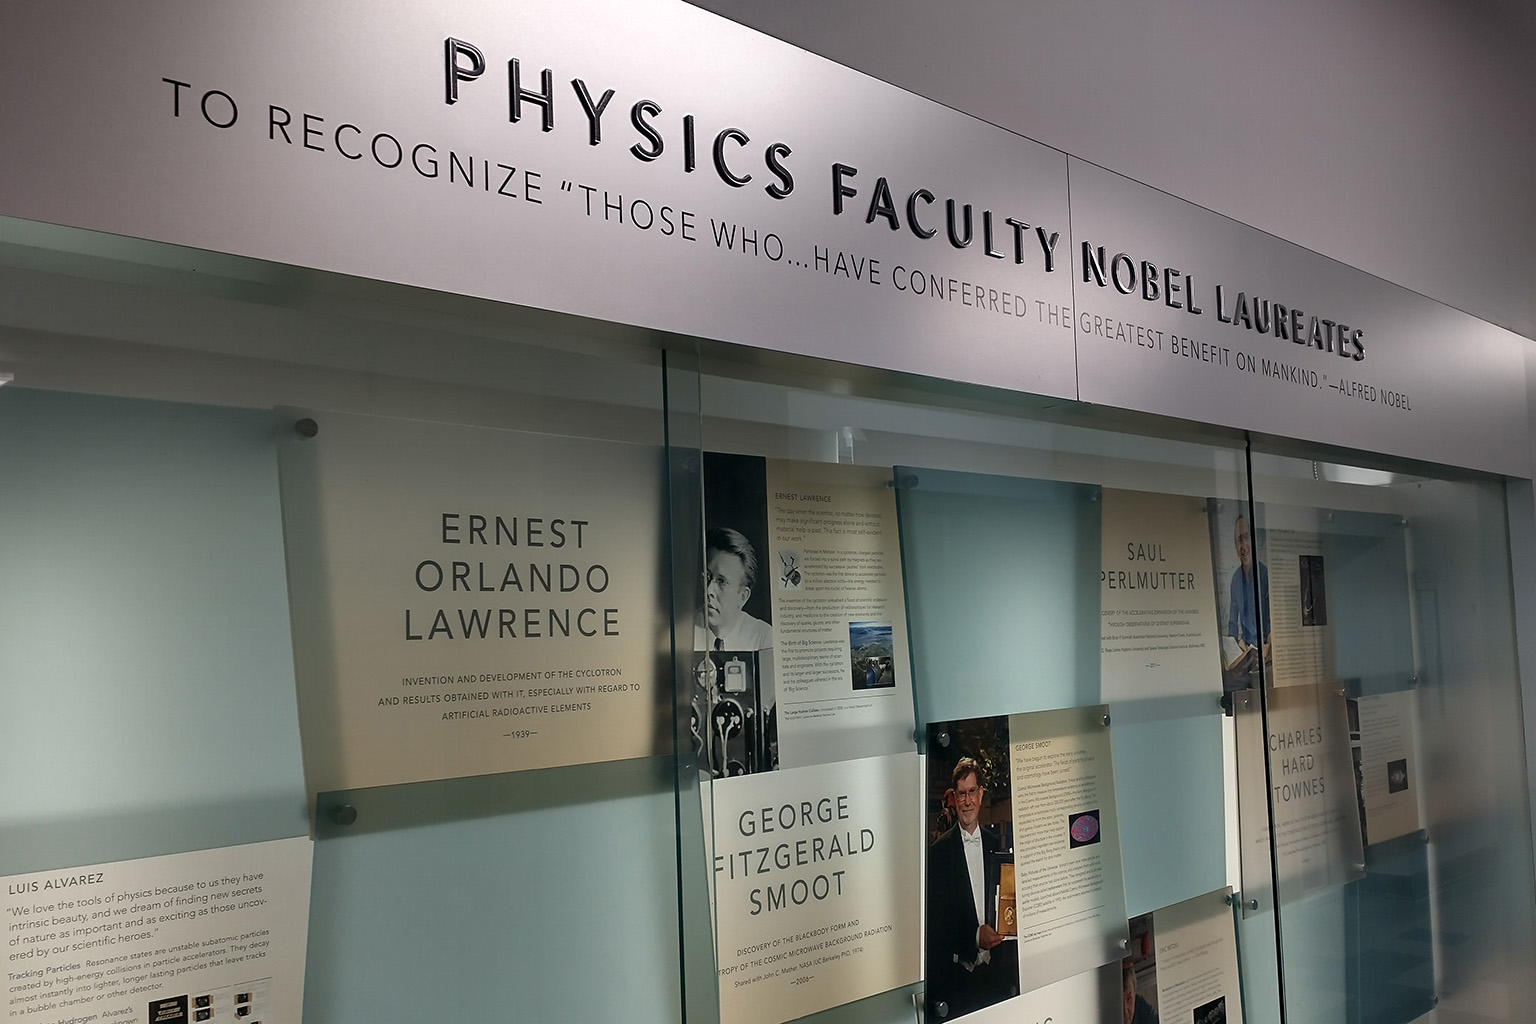 A display lists the physics department's Nobel laureates, including Ernest Orlando Lawrence and George Fitzgerald Smooth.